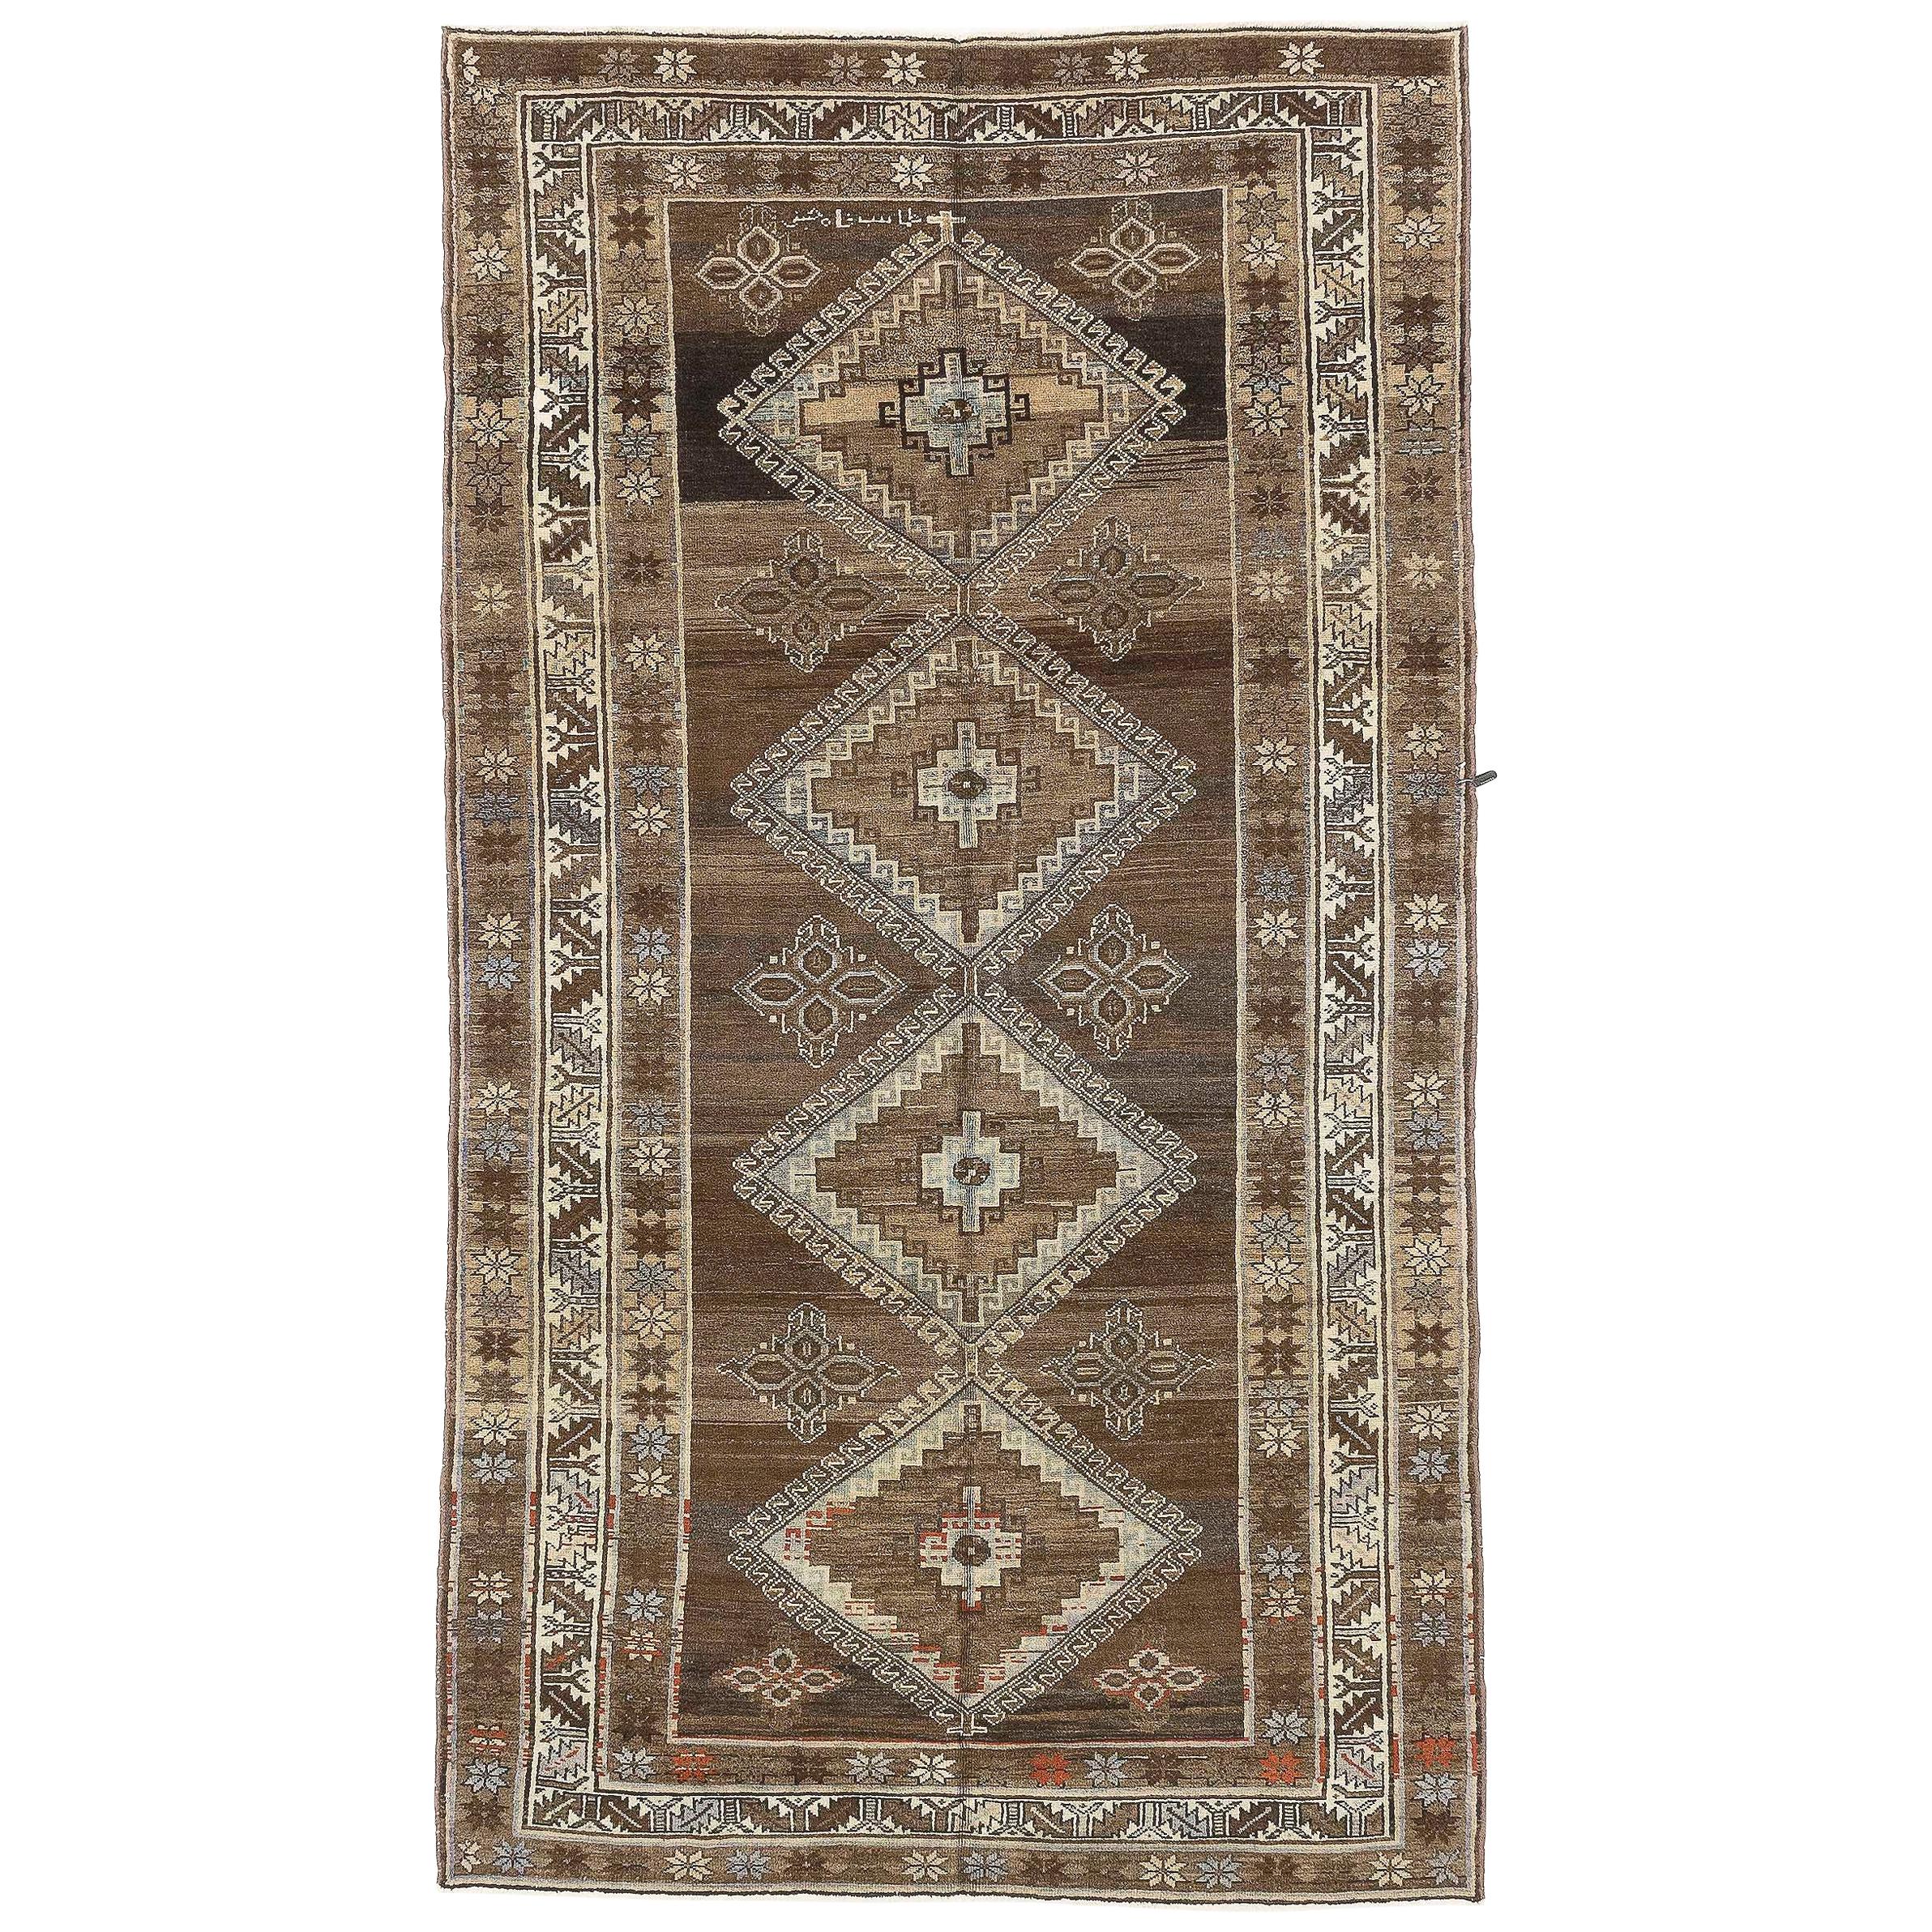 Antique Persian Malayer Rug with Gray and Brown Geometric Motifs For Sale